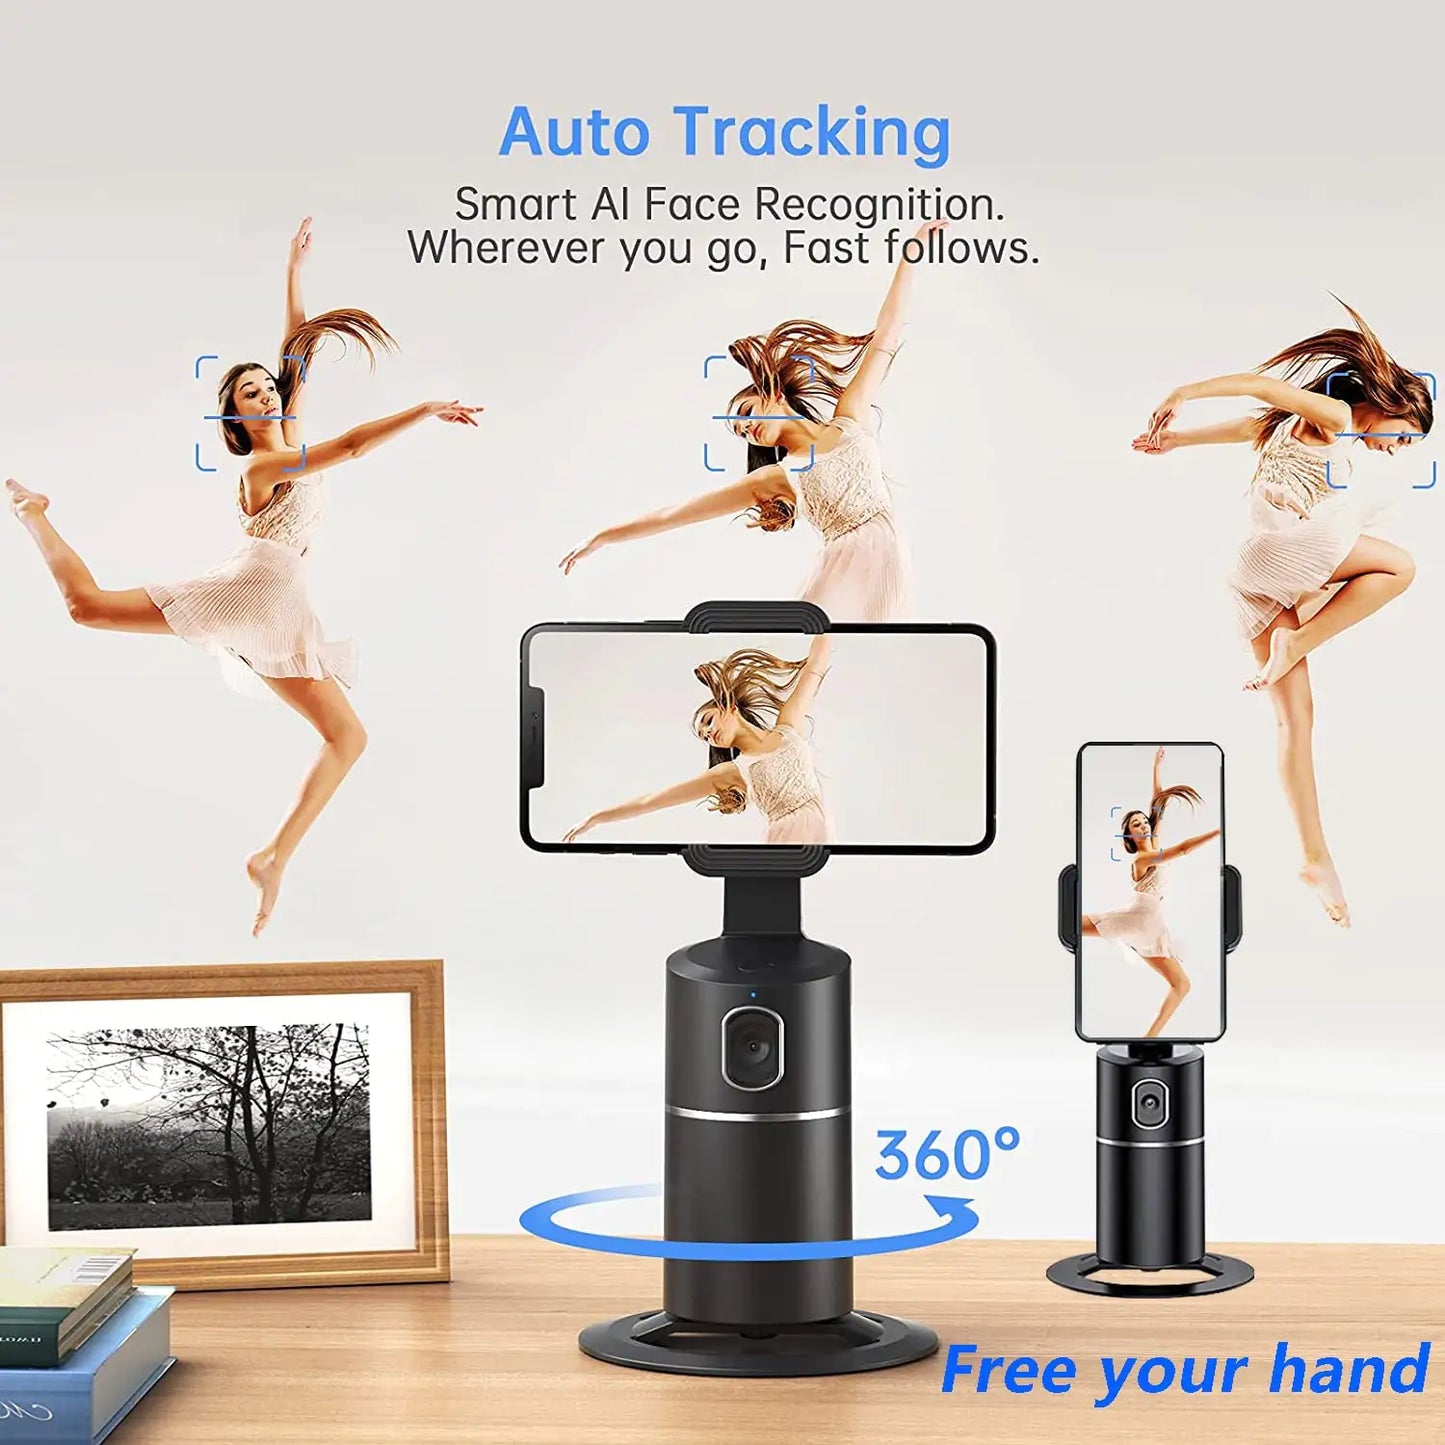 Tripod (For Phone Use) Auto-tracking 360